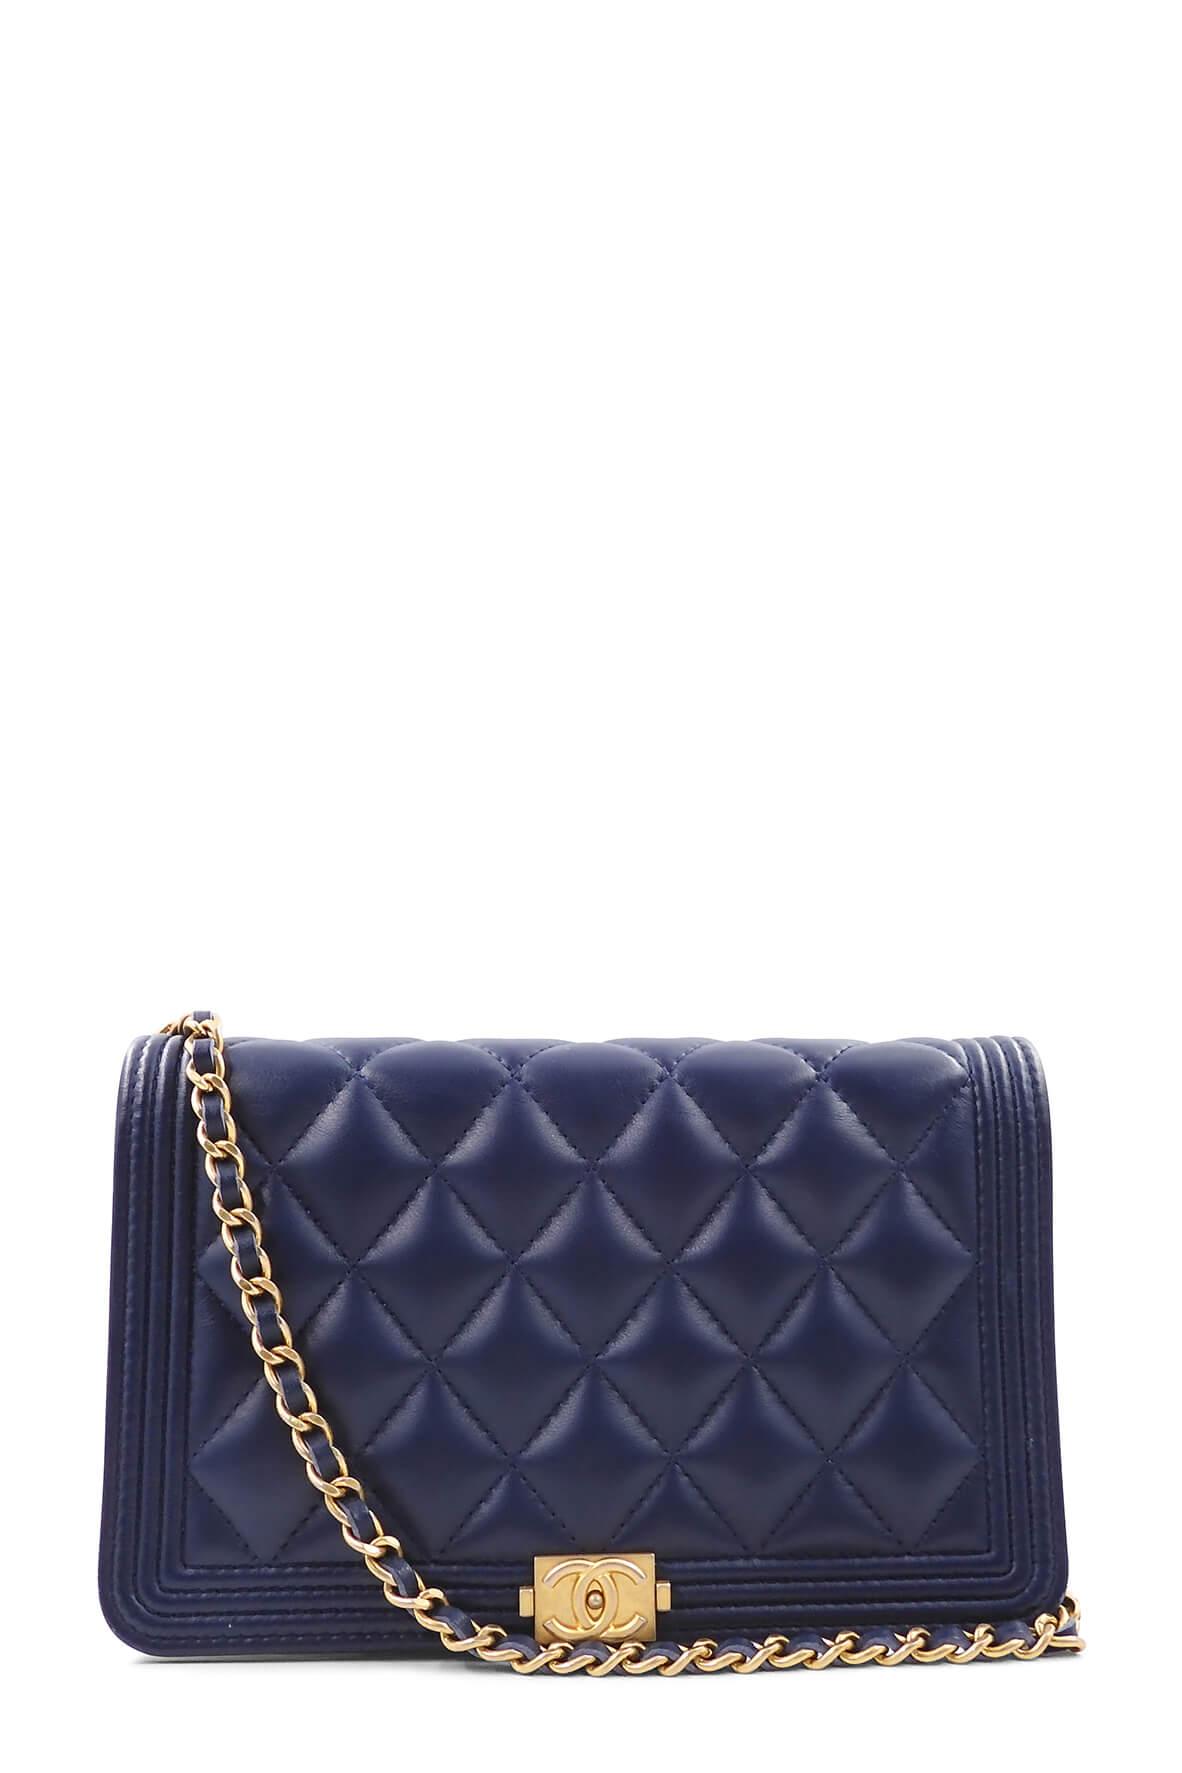 Wallet on chain timelessclassique patent leather crossbody bag Chanel Blue  in Patent leather  22695534